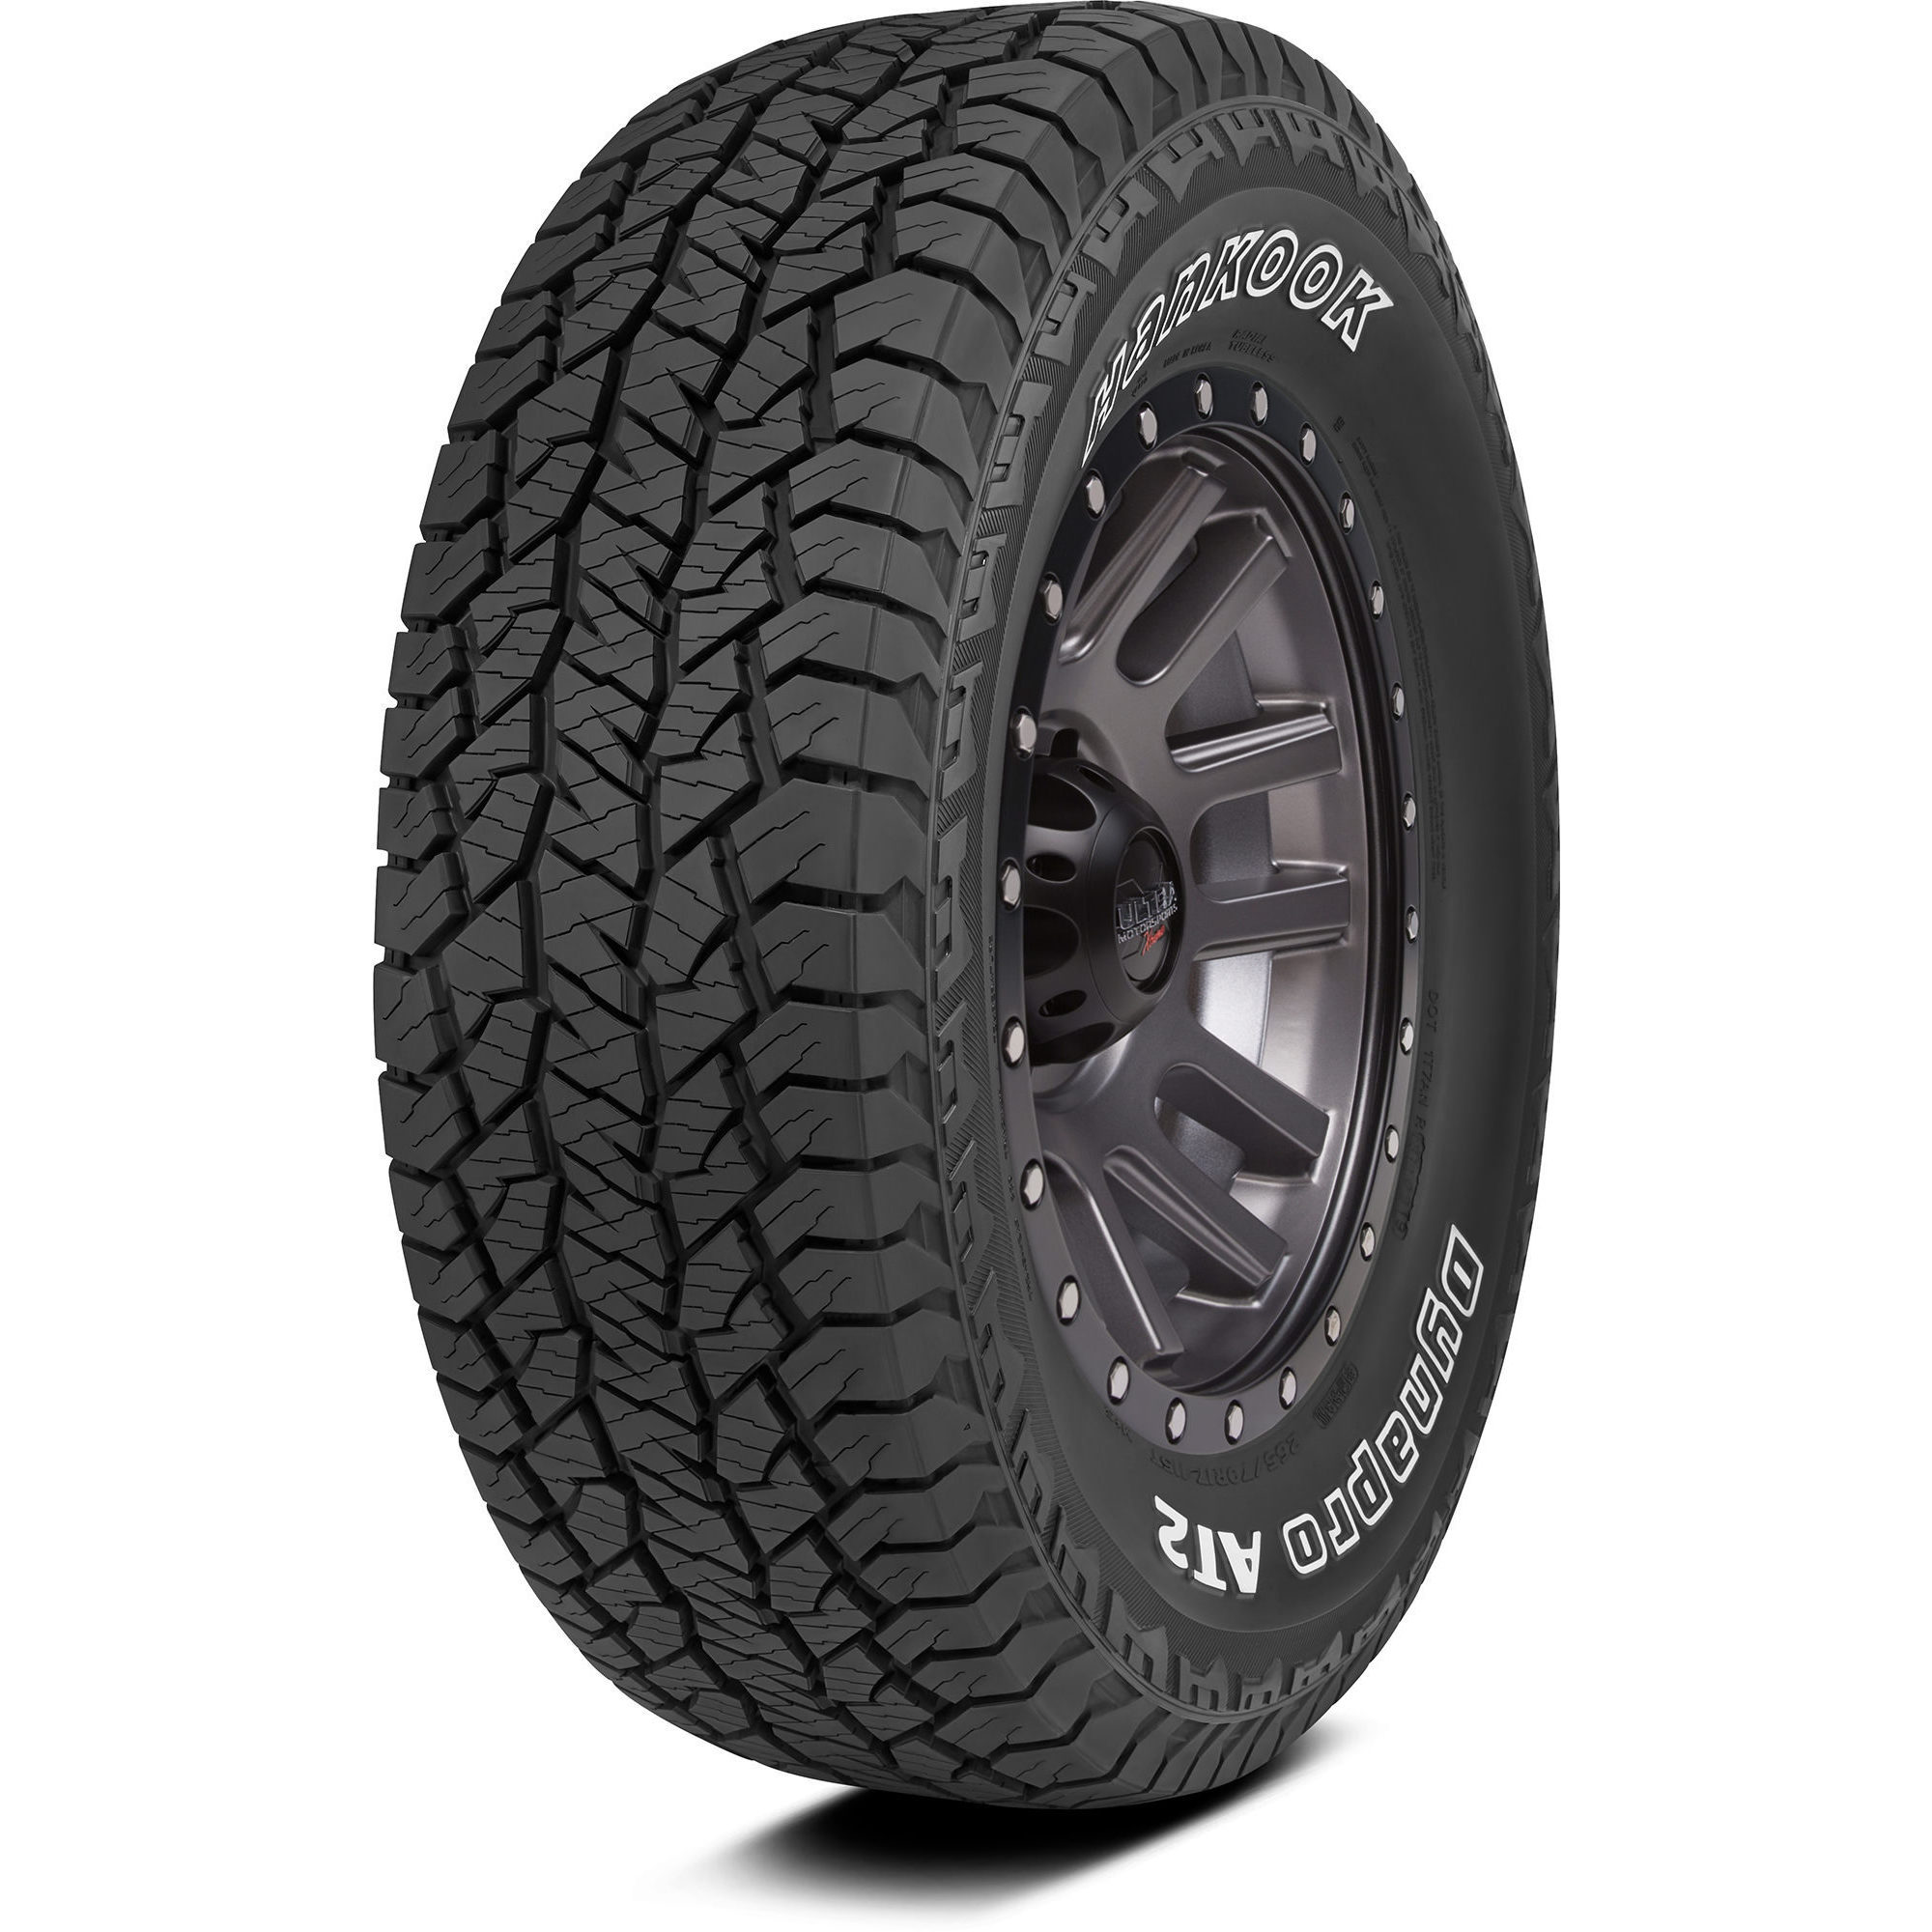 Tyre and AT2 Reviews Tests Dynapro - Hankook